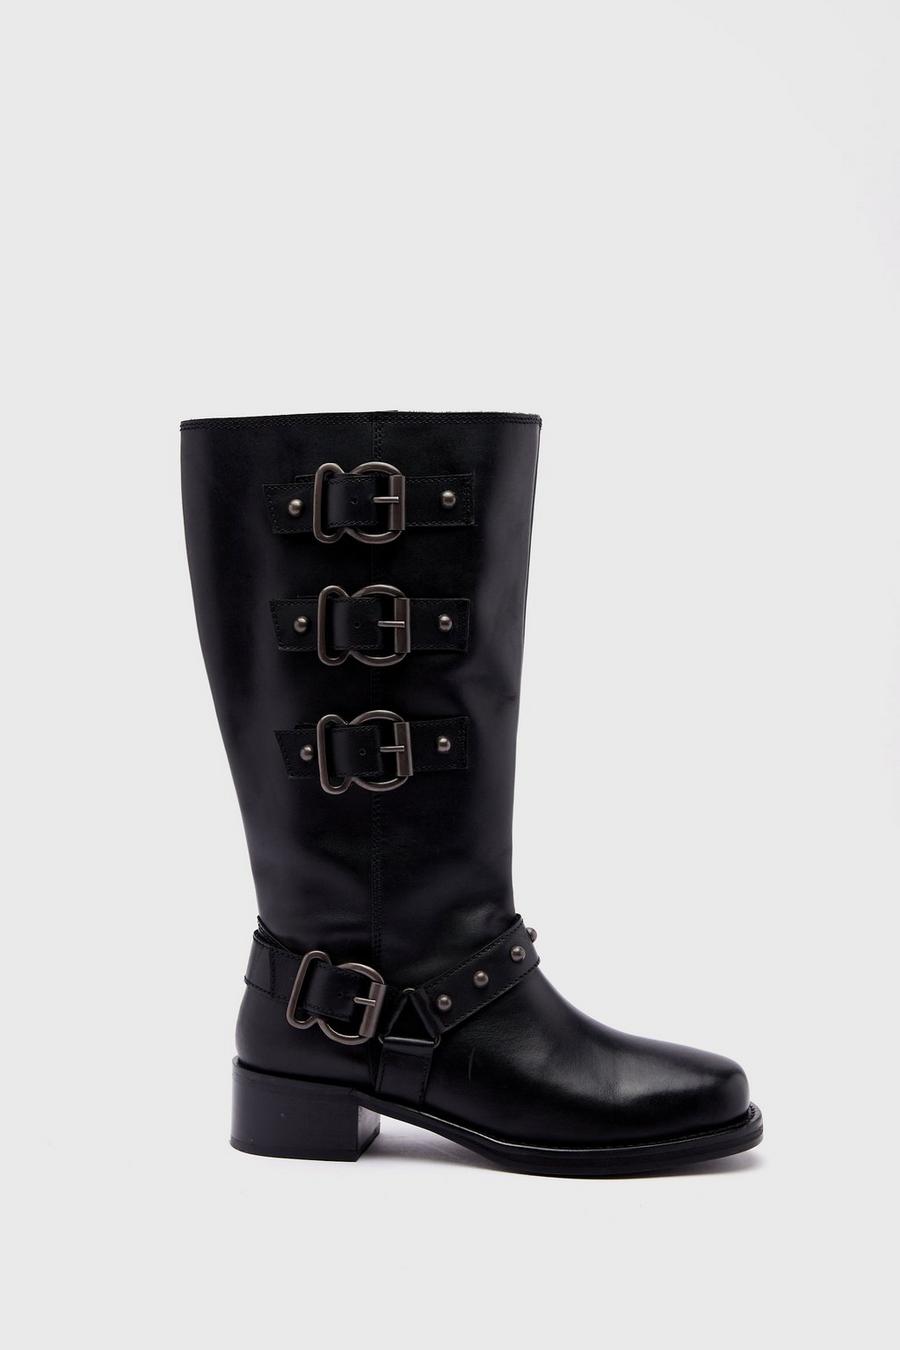 Tarnished Leather Multi Buckle Harness Knee High Boots